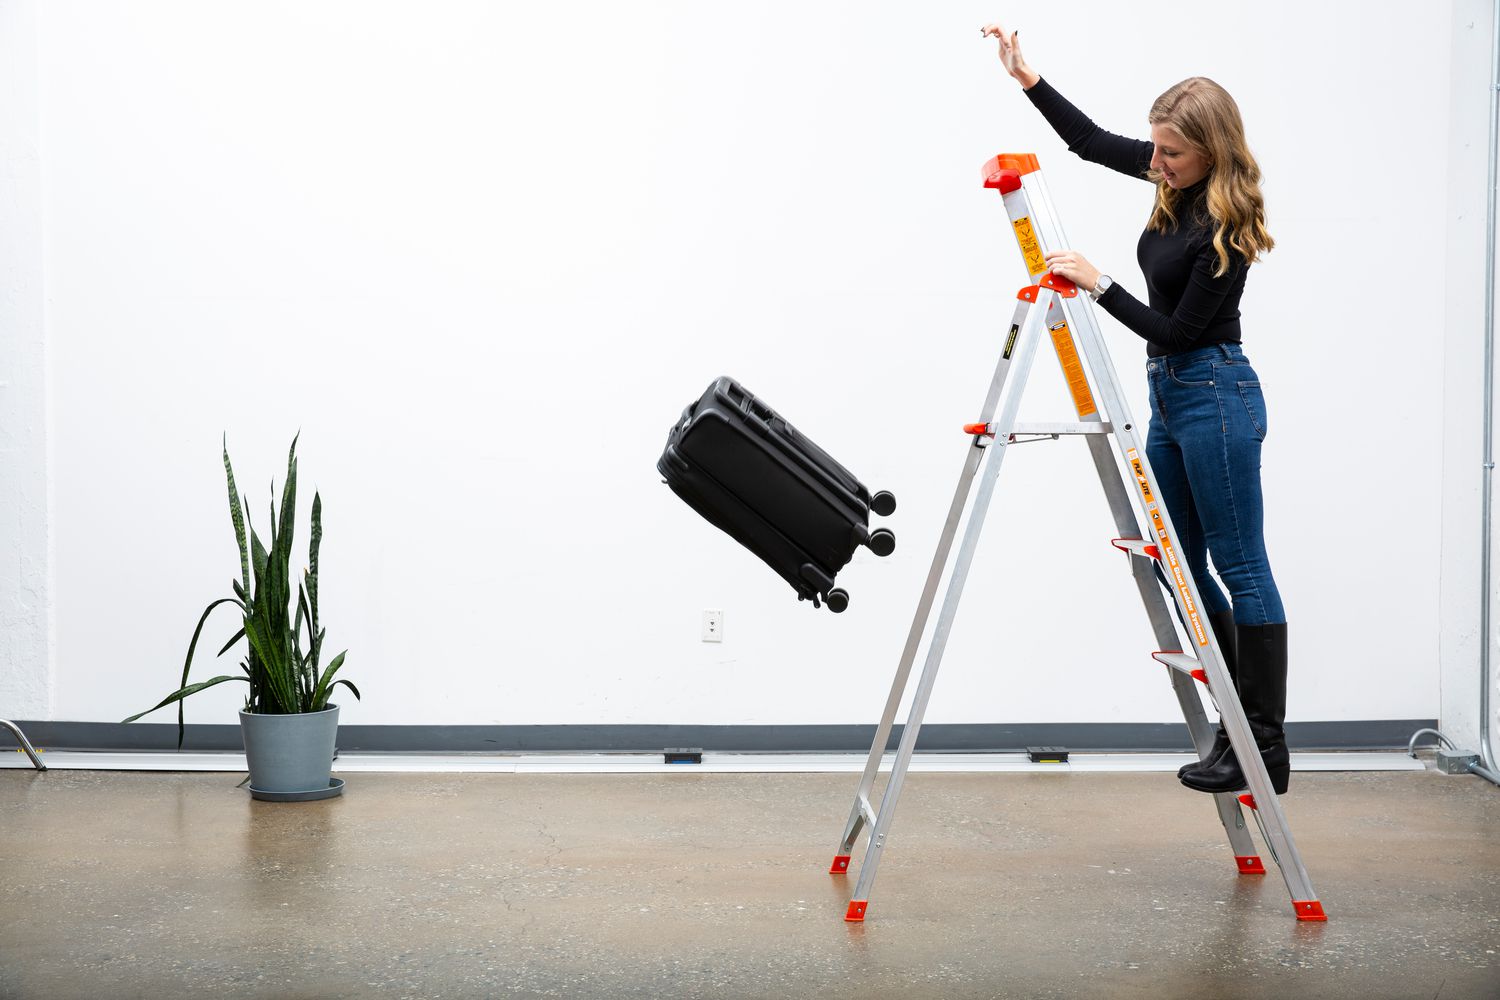 pushing a suitcase off a ladder to test durability